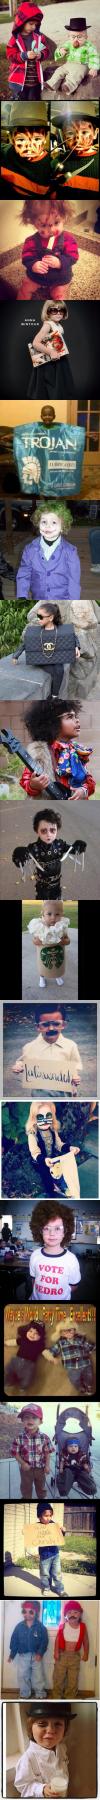 18 kids who definitely have no idea what their costume means, halloween